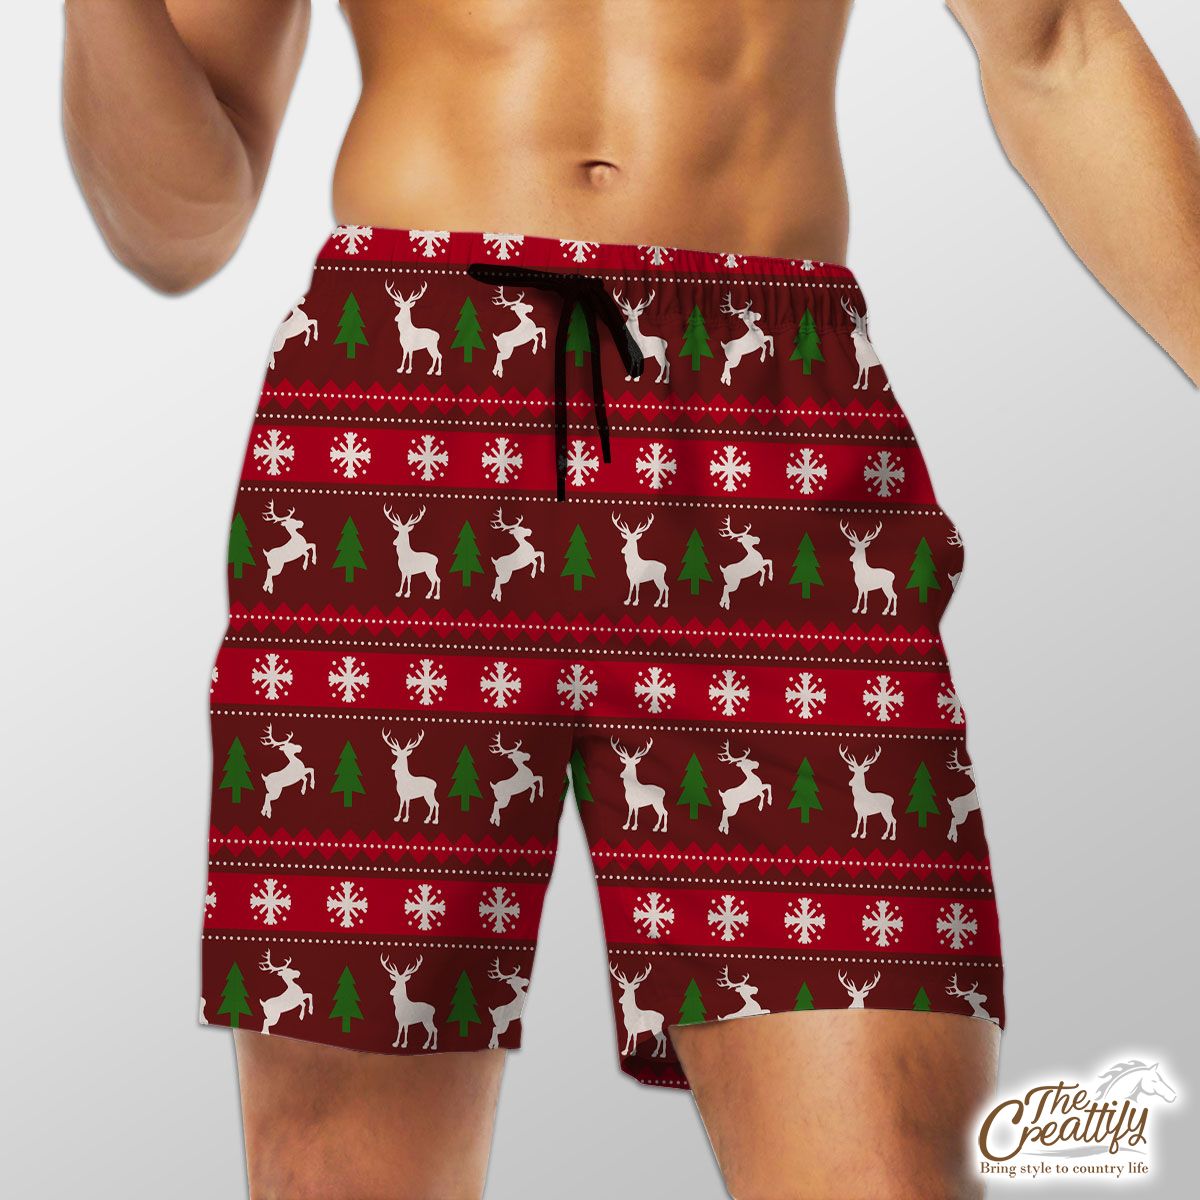 Red Green And White Christmas Tree, Reindeer With Snowflake Shorts